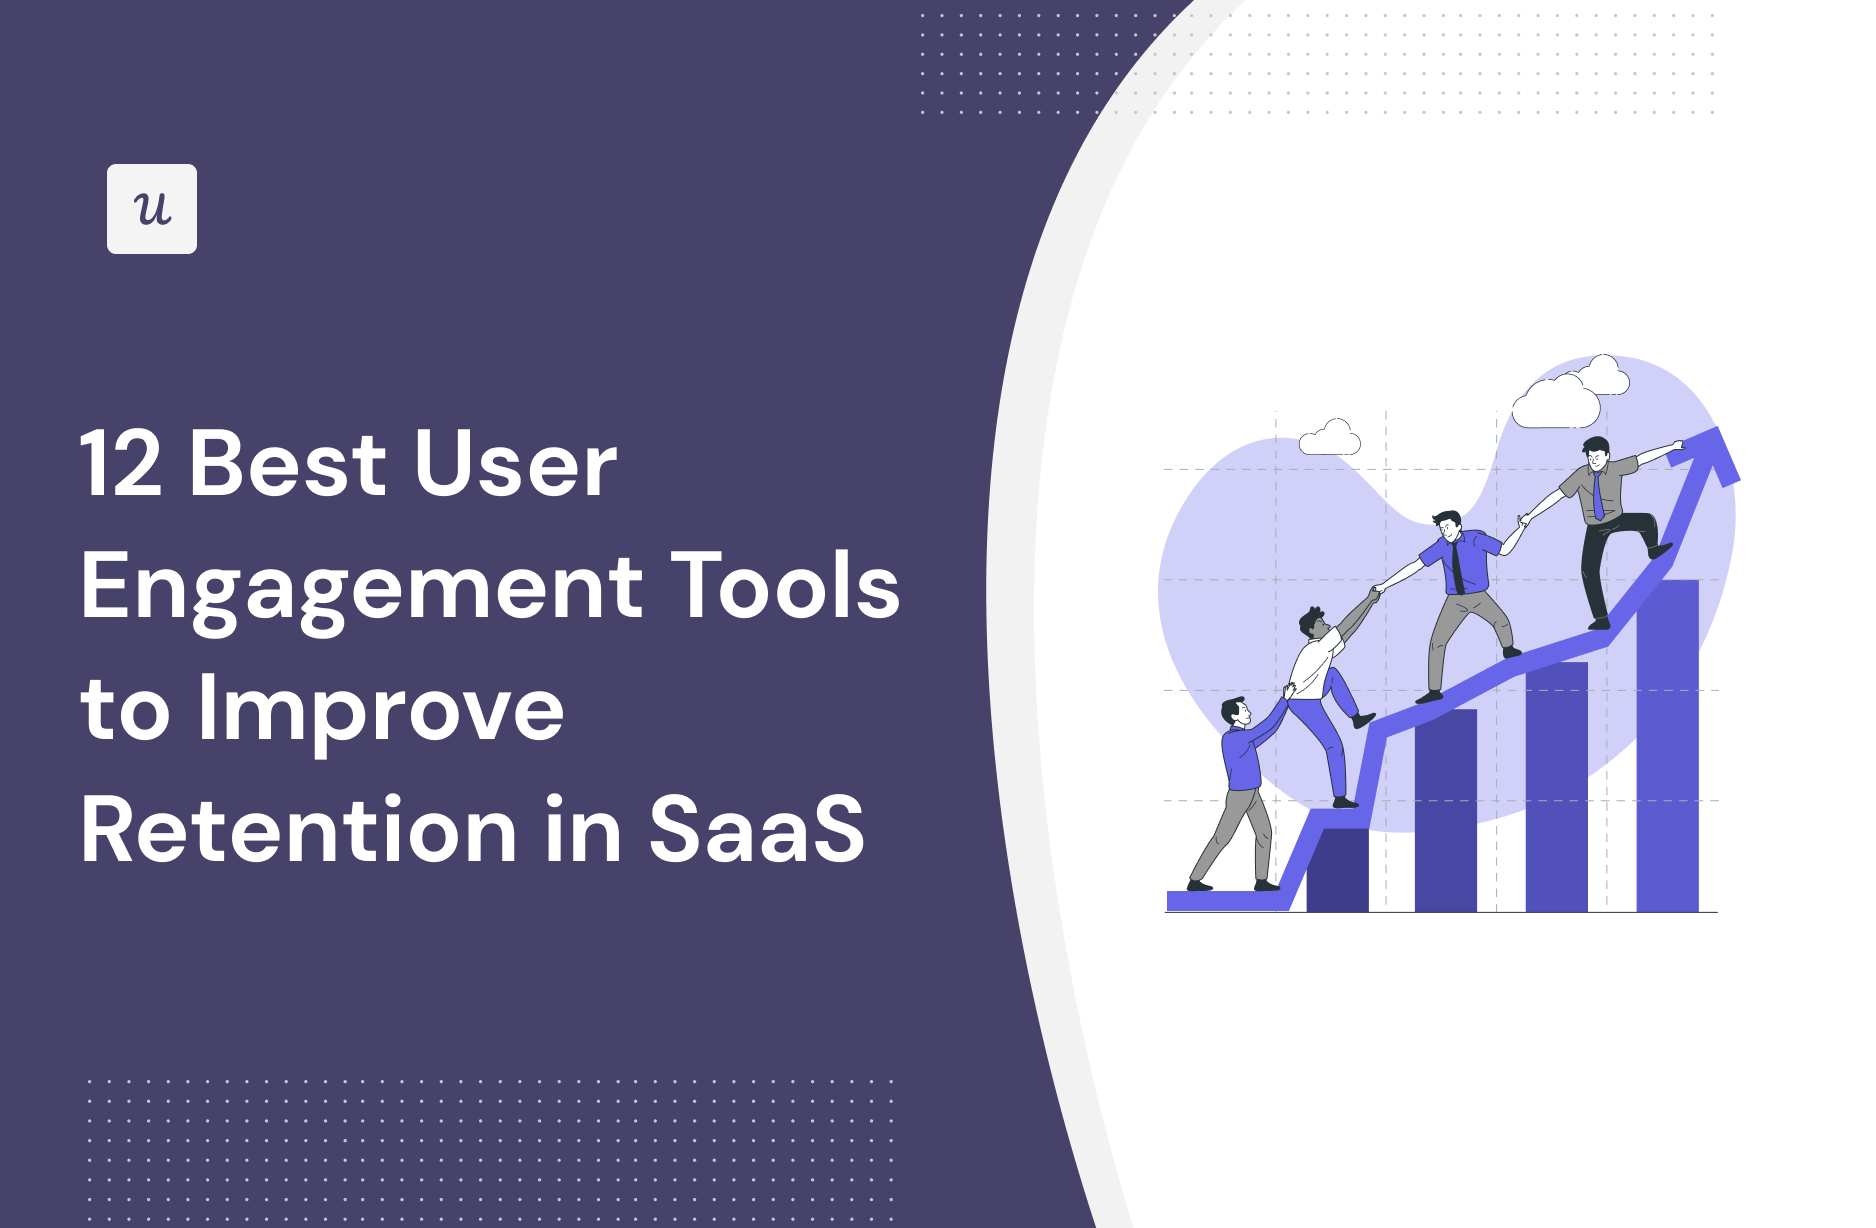 12 Best User Engagement Tools to Improve Retention in SaaS